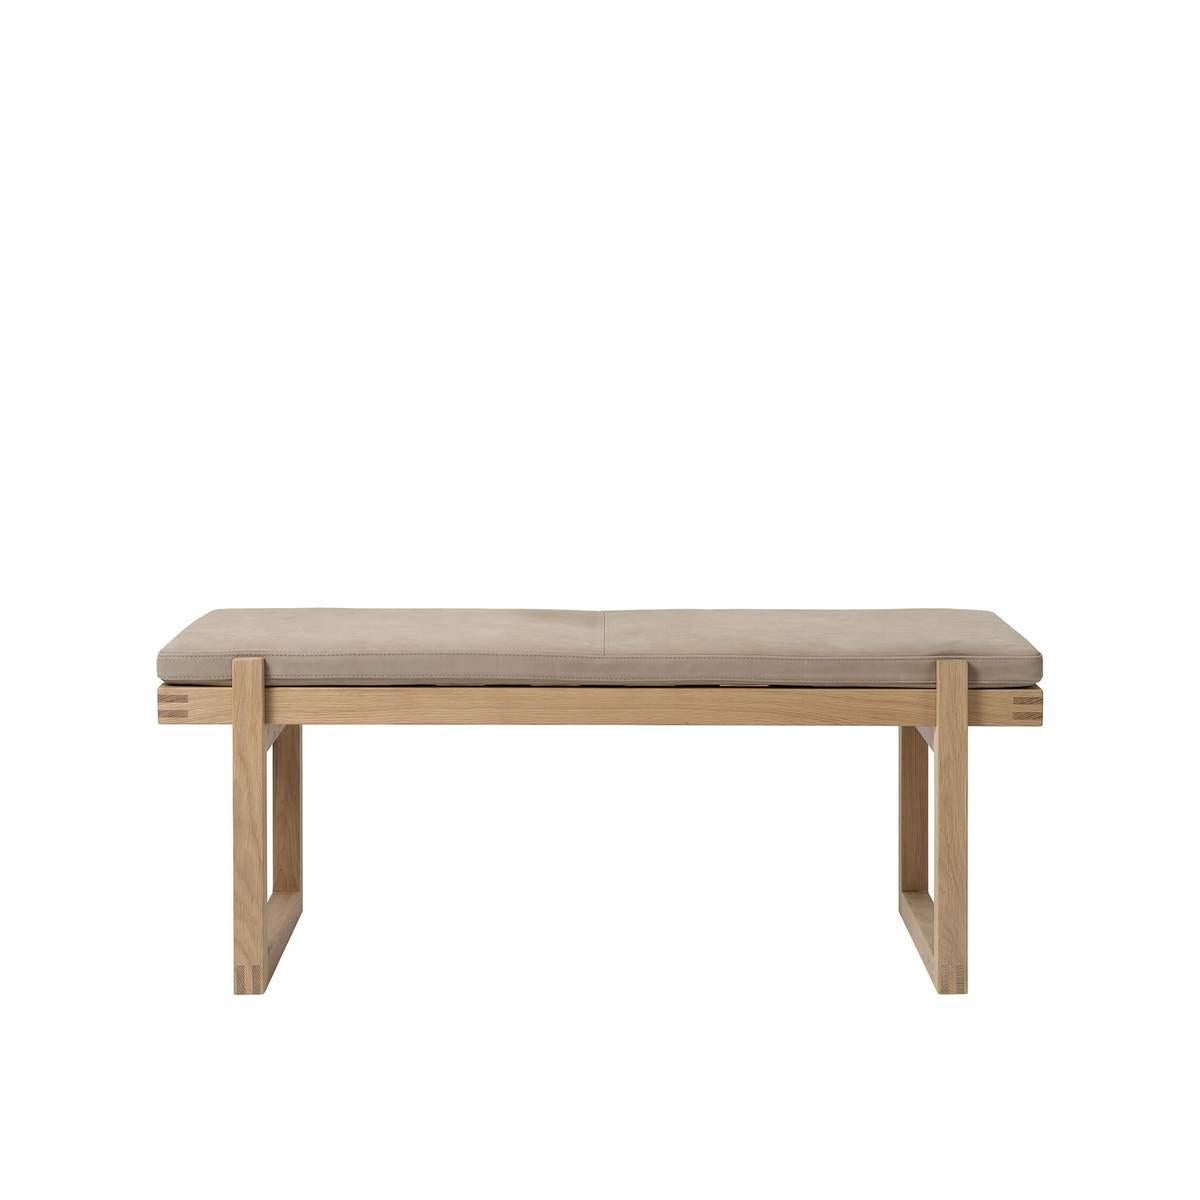 Beige minimal bench by Kristina Dam Studio
Materials: Solid oak with oil treatment, beige textile.
Also available in other colors.
Dimensions: 40 x 115 x H 44cm.

The bench frame is made of solid oak and the soft foam mattress is available in